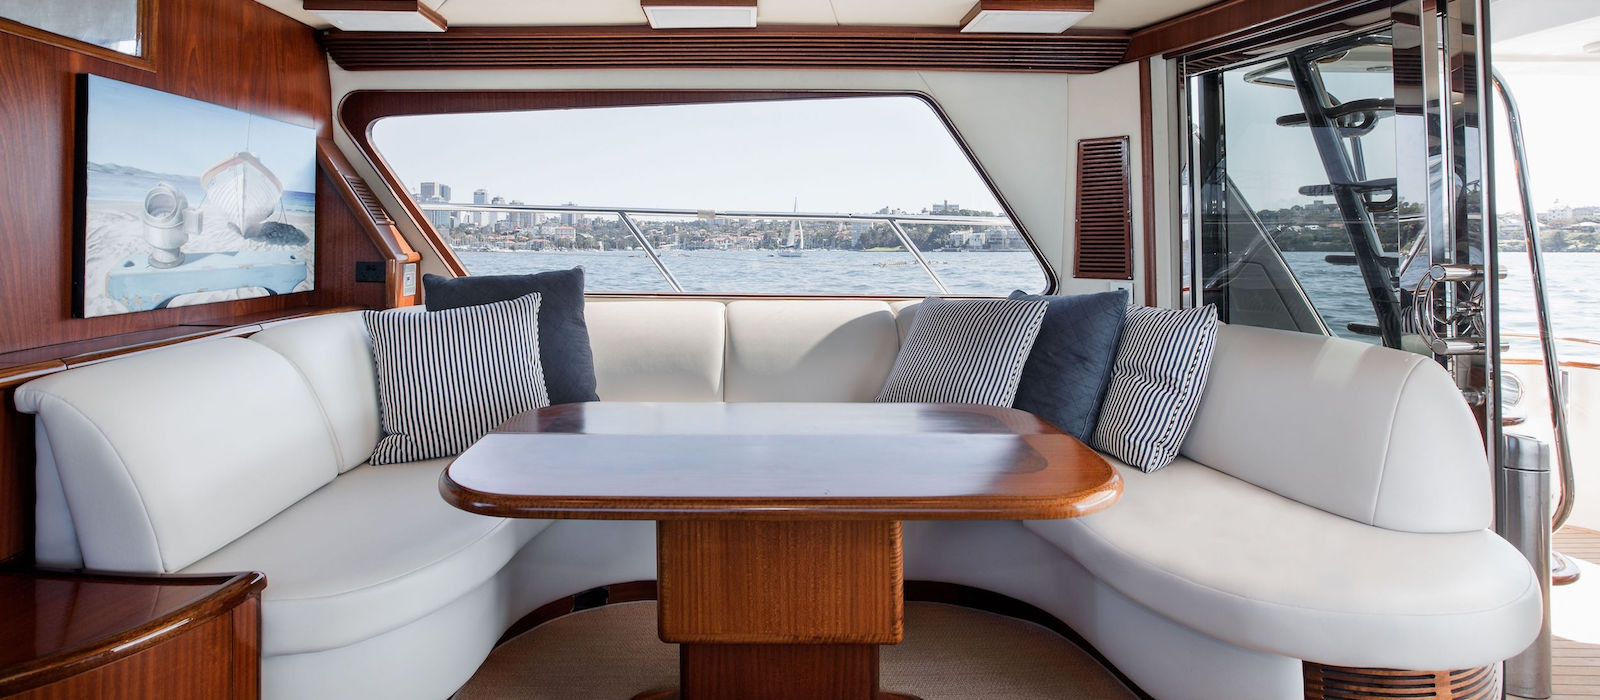 Comfortable seating on Enigma luxury boat hire